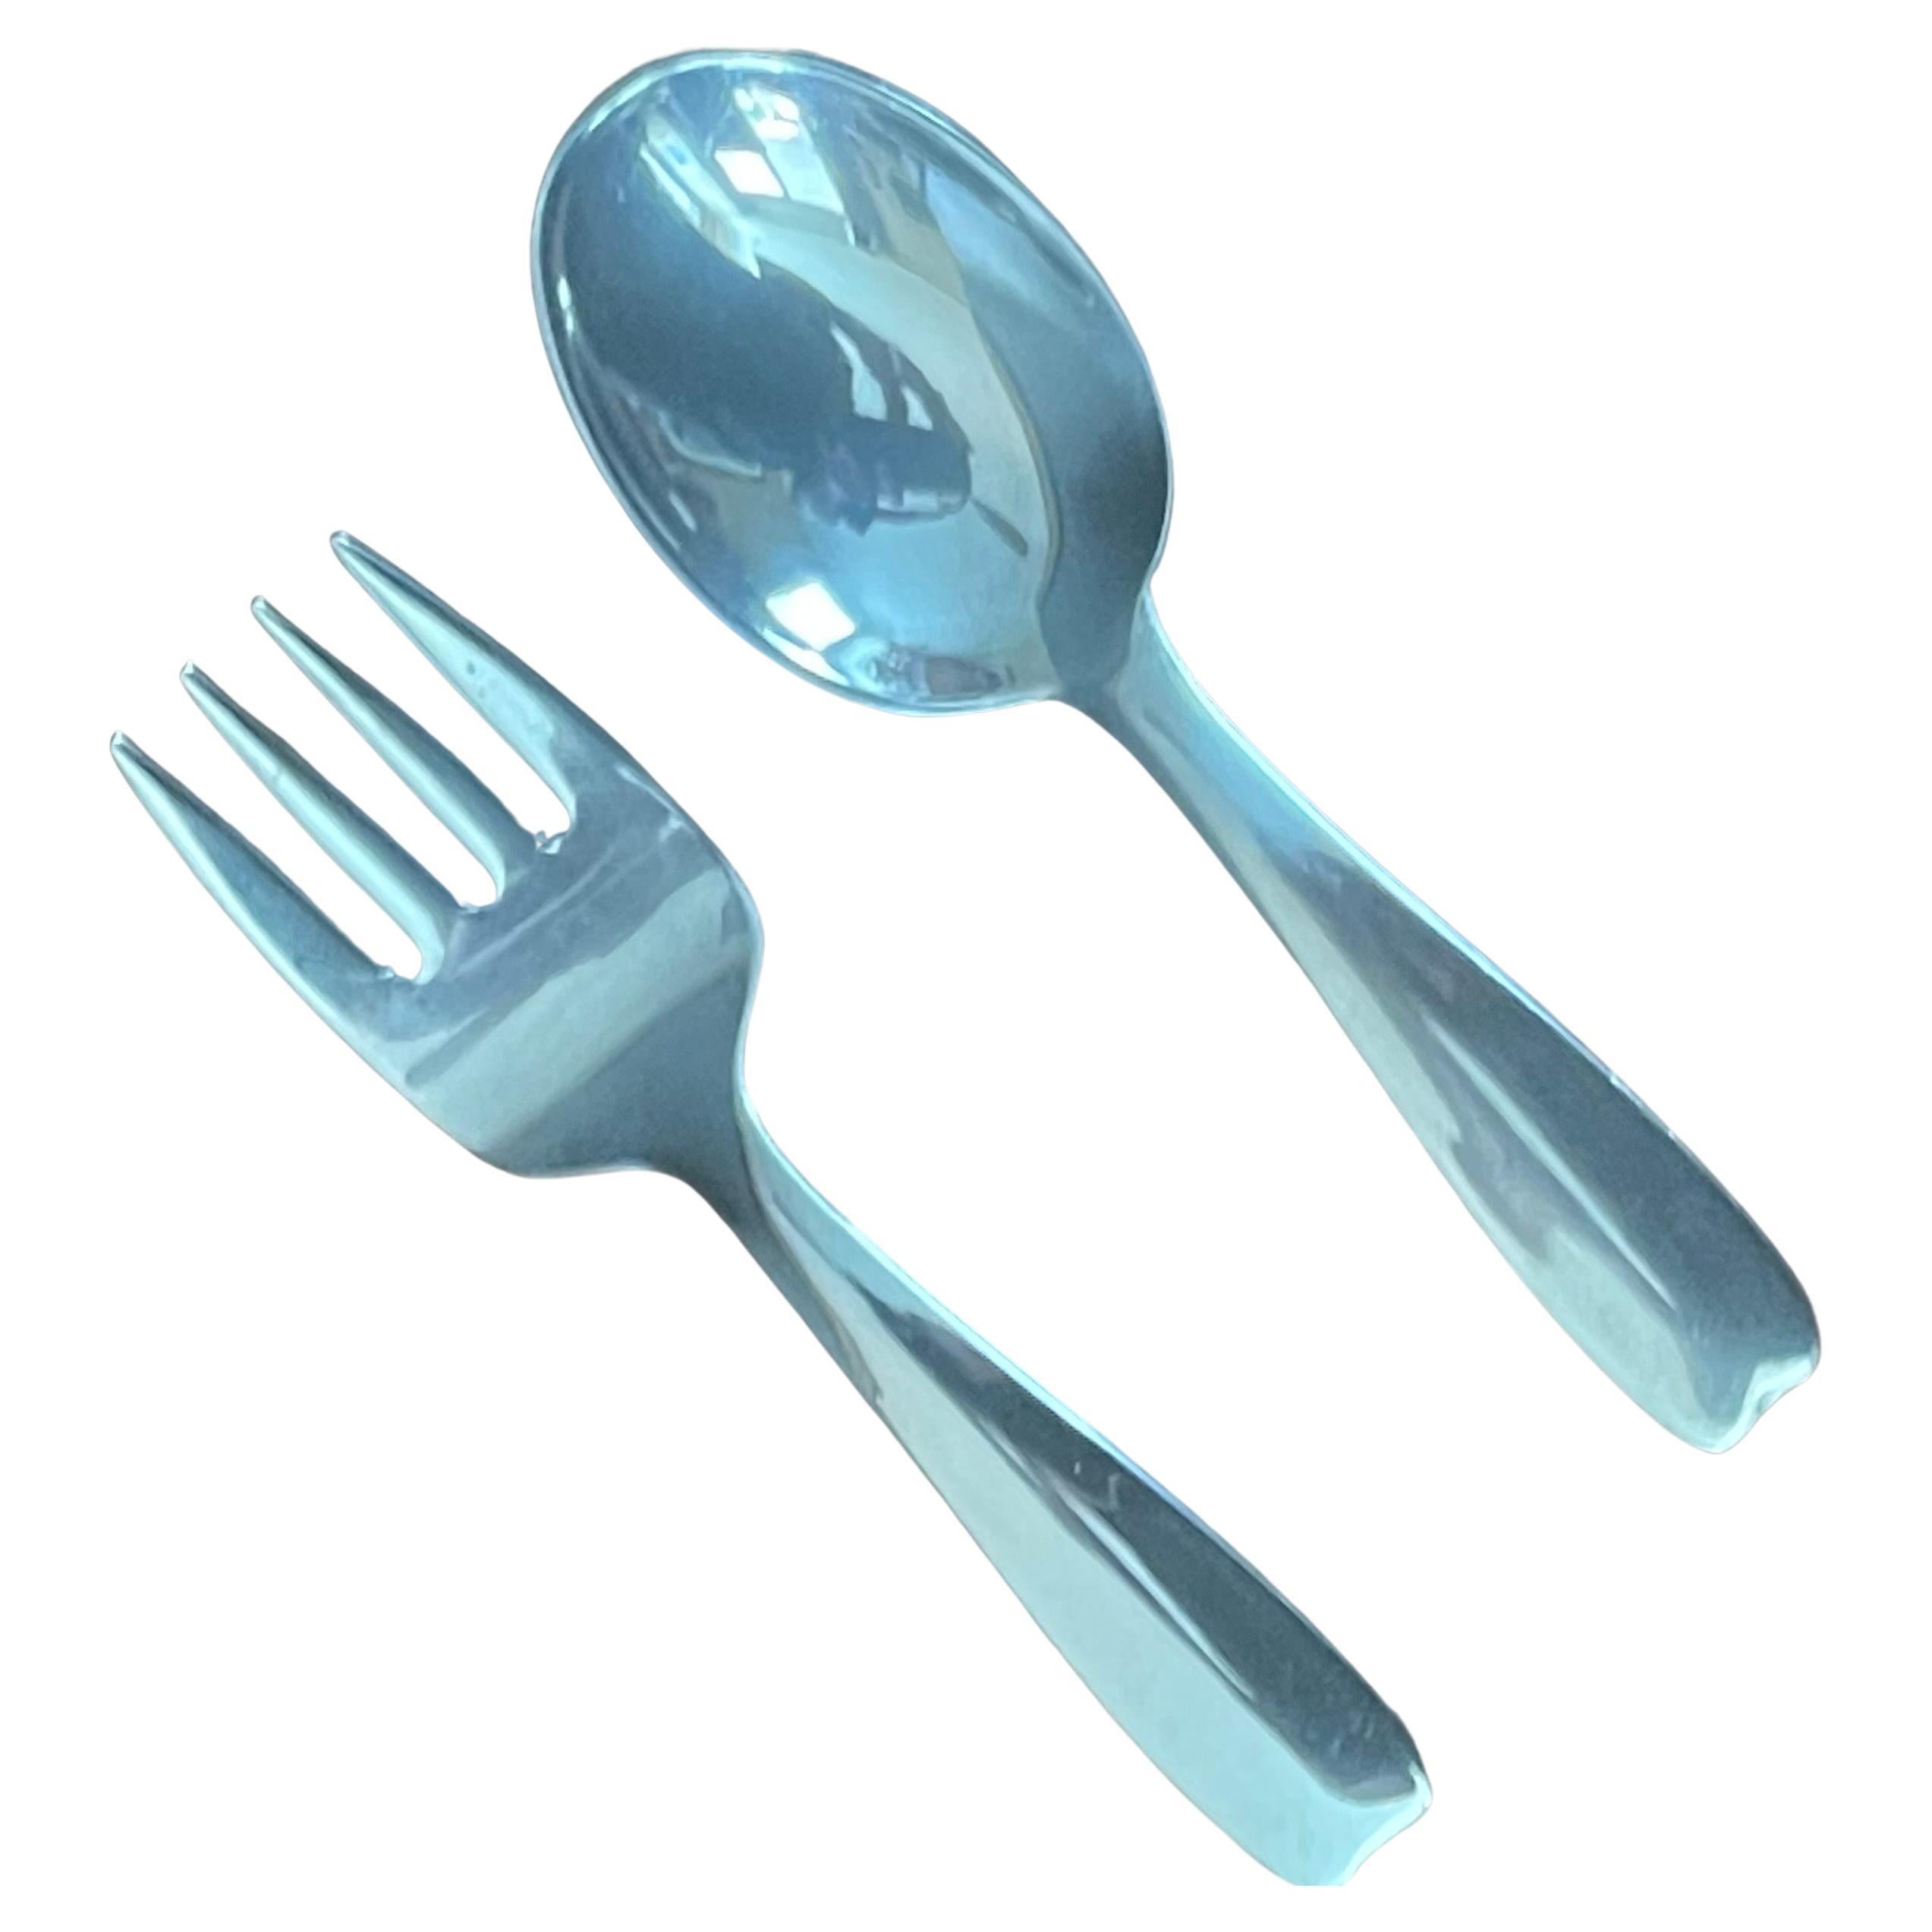 Sterling silver baby flatware (fork & spoon) in the 